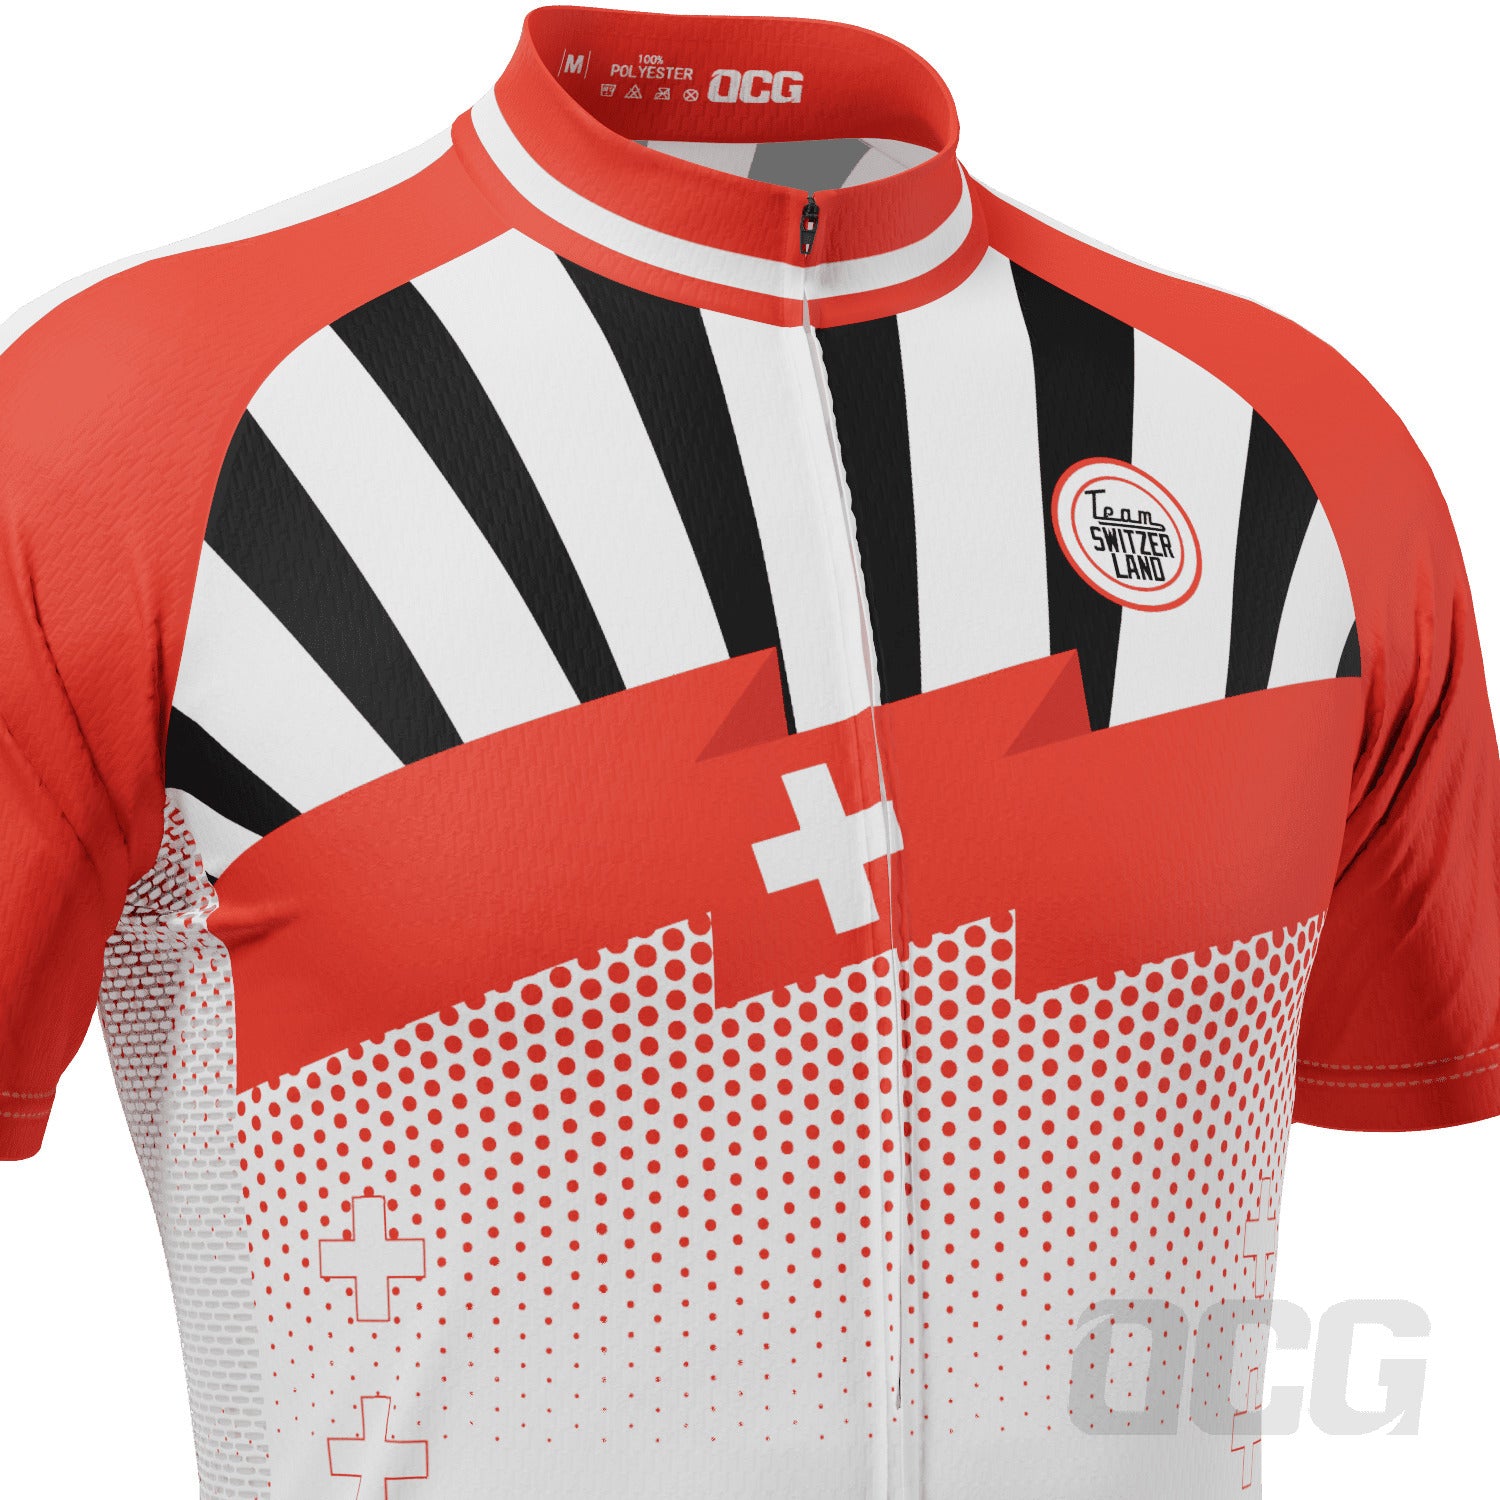 Men's World Countries Team Switzerland Icon Short Sleeve Cycling Jersey